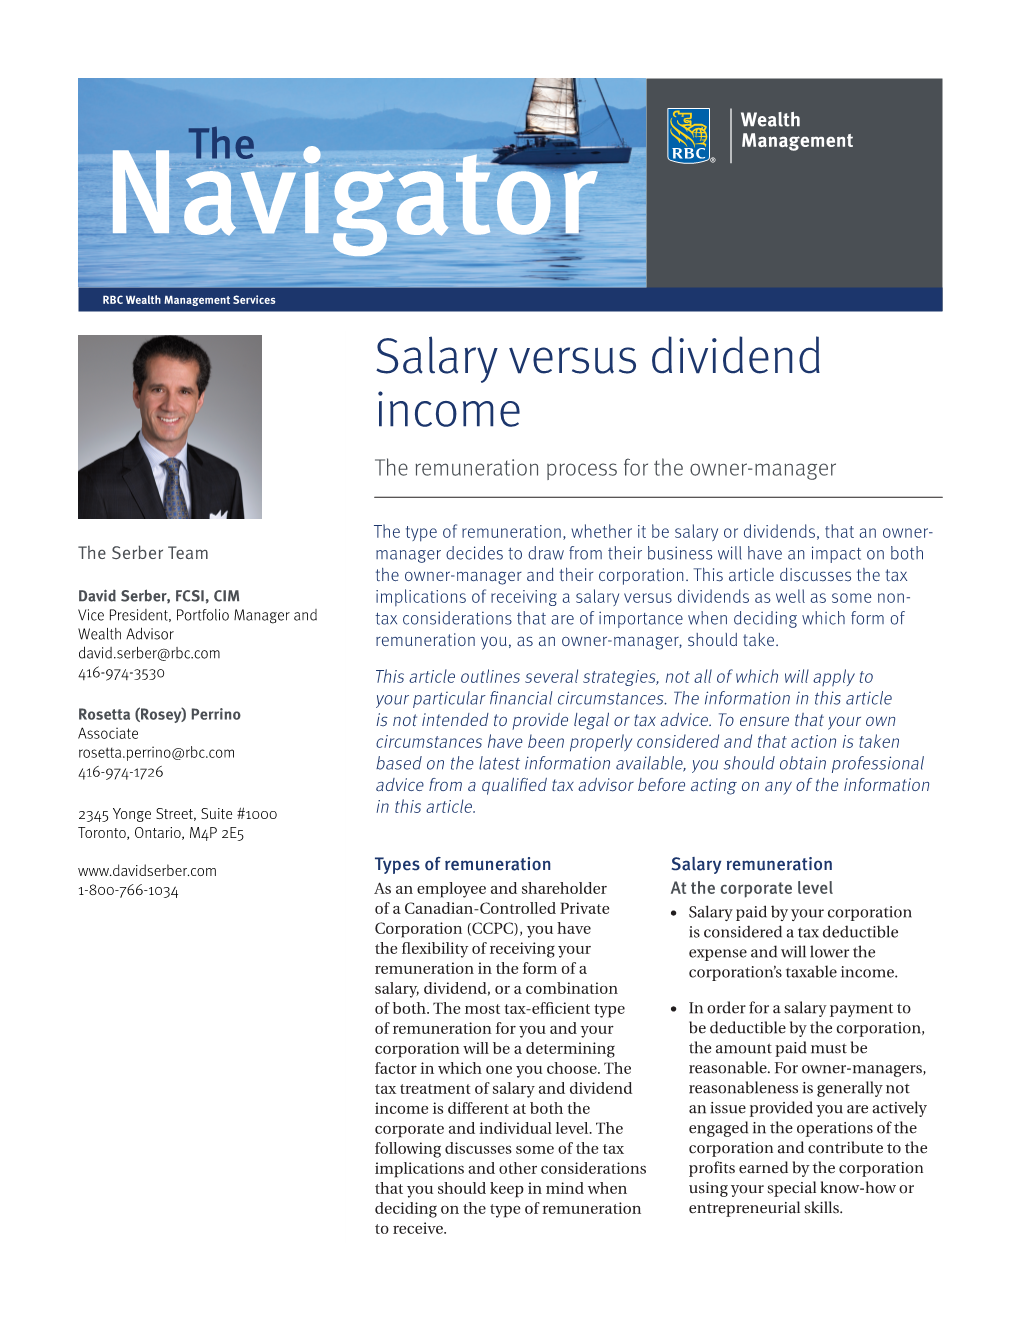 Salary Versus Dividend Income the Remuneration Process for the Owner-Manager